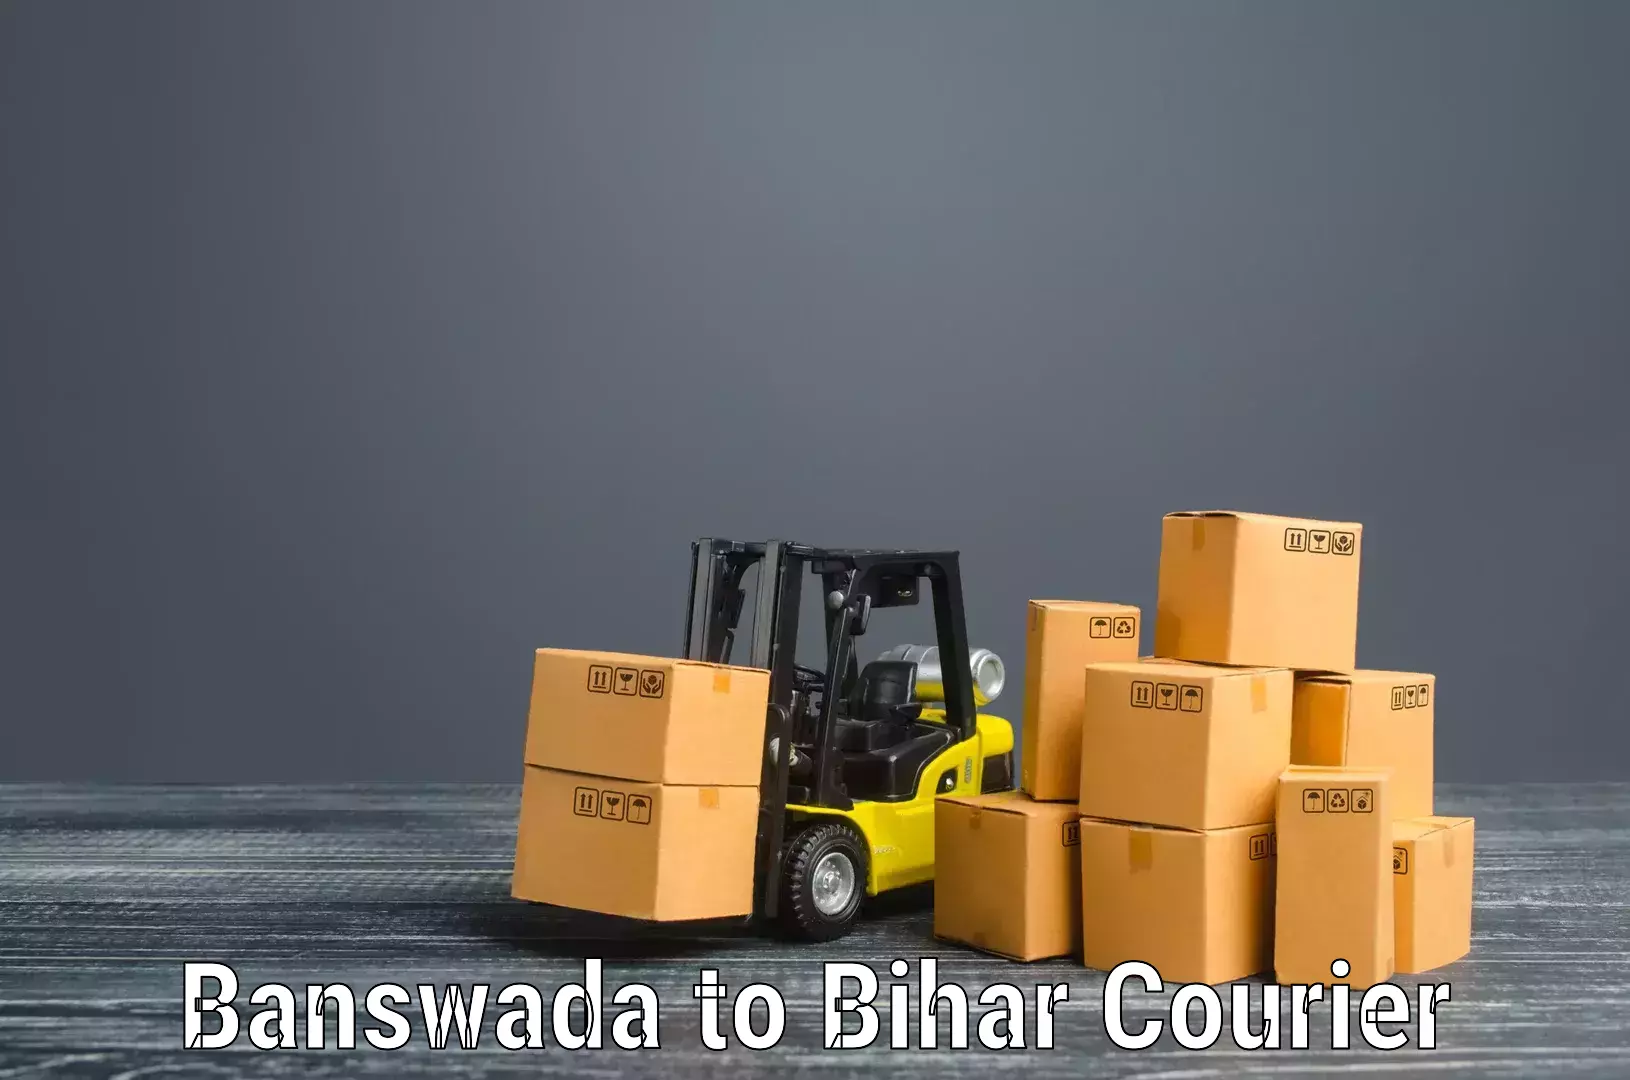 Quality moving and storage in Banswada to Nawada